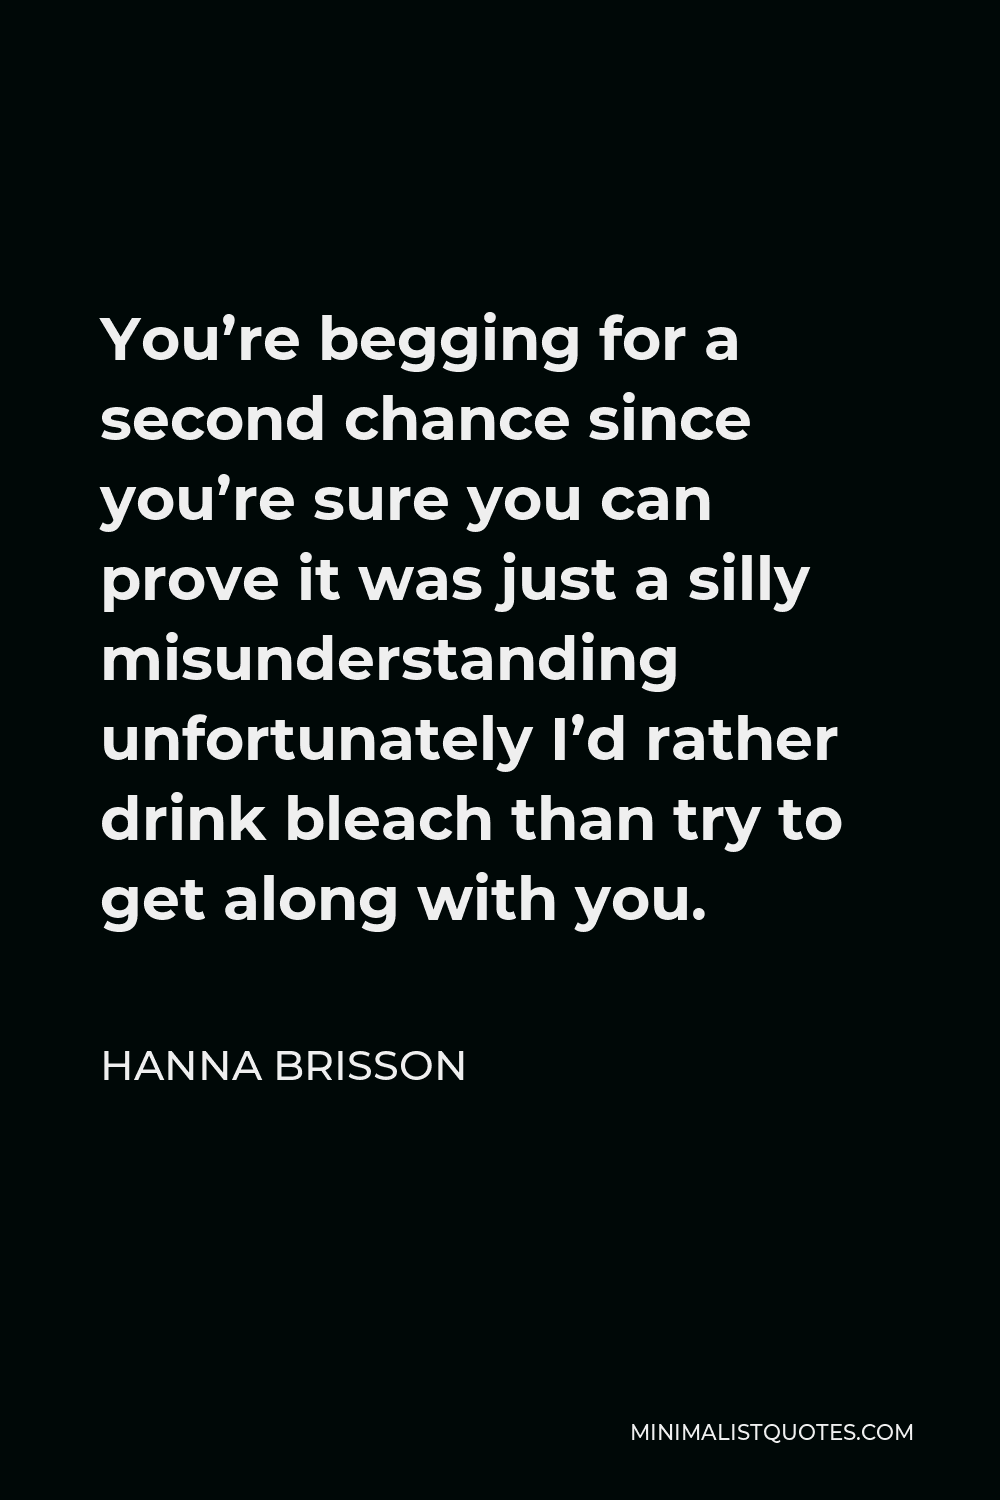 Hanna Brisson Quote - You’re begging for a second chance since you’re sure you can prove it was just a silly misunderstanding unfortunately I’d rather drink bleach than try to get along with you.